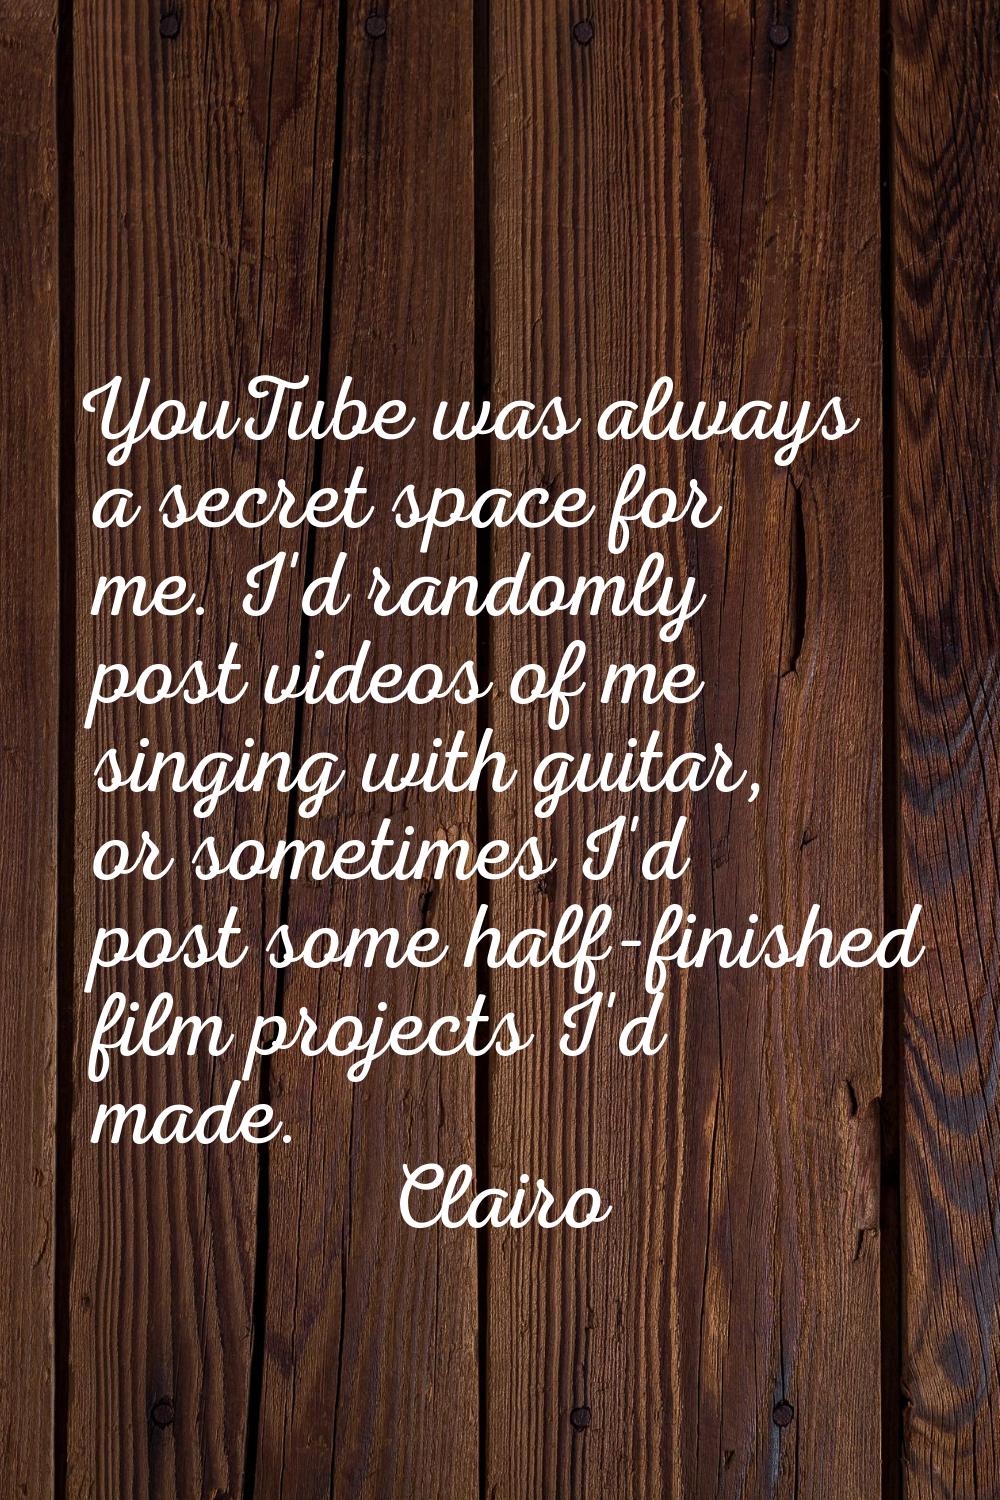 YouTube was always a secret space for me. I'd randomly post videos of me singing with guitar, or so